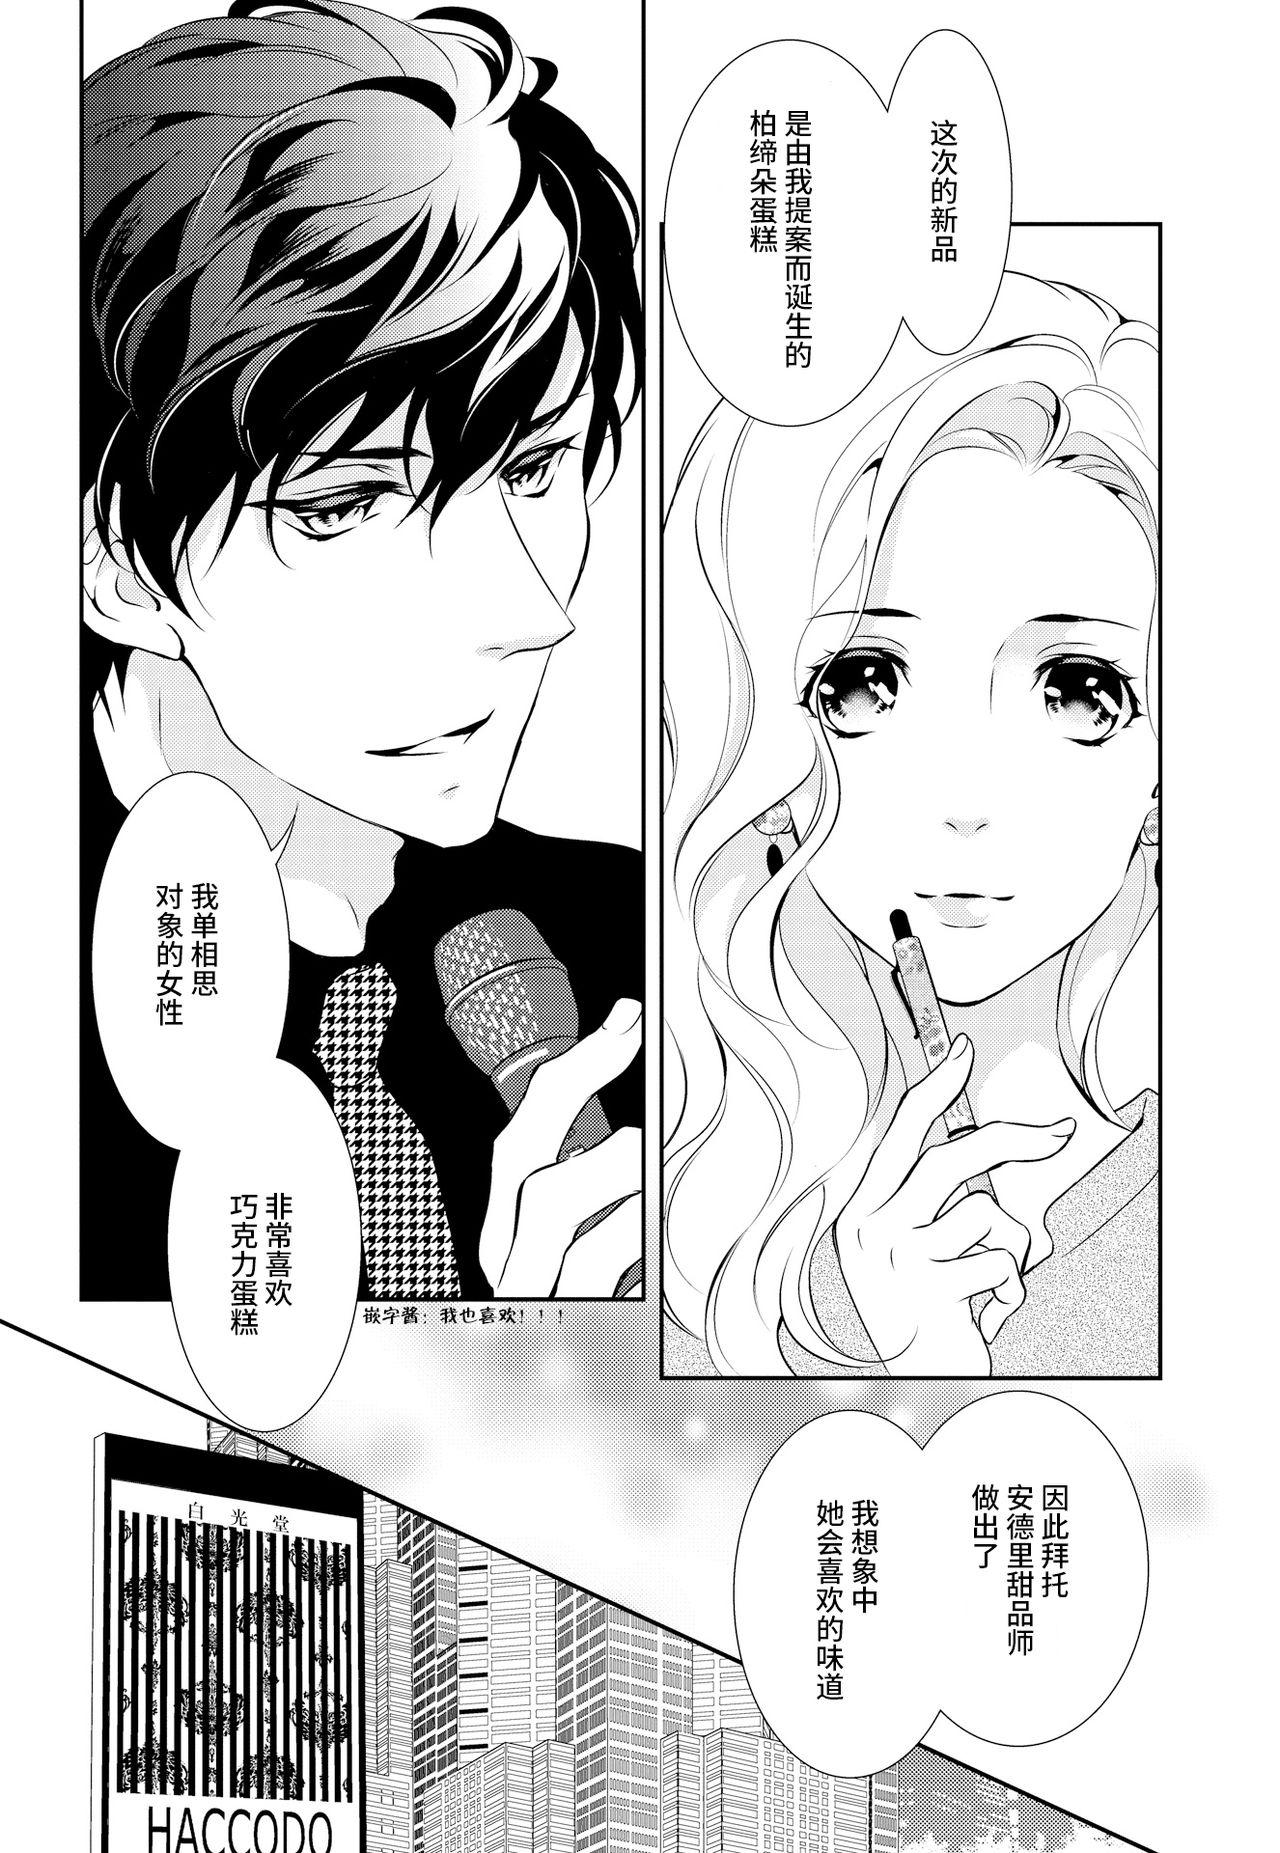 Hermosa Prime Chocolate Boys | 顶级巧克力男子 Ch.3 Officesex - Page 8